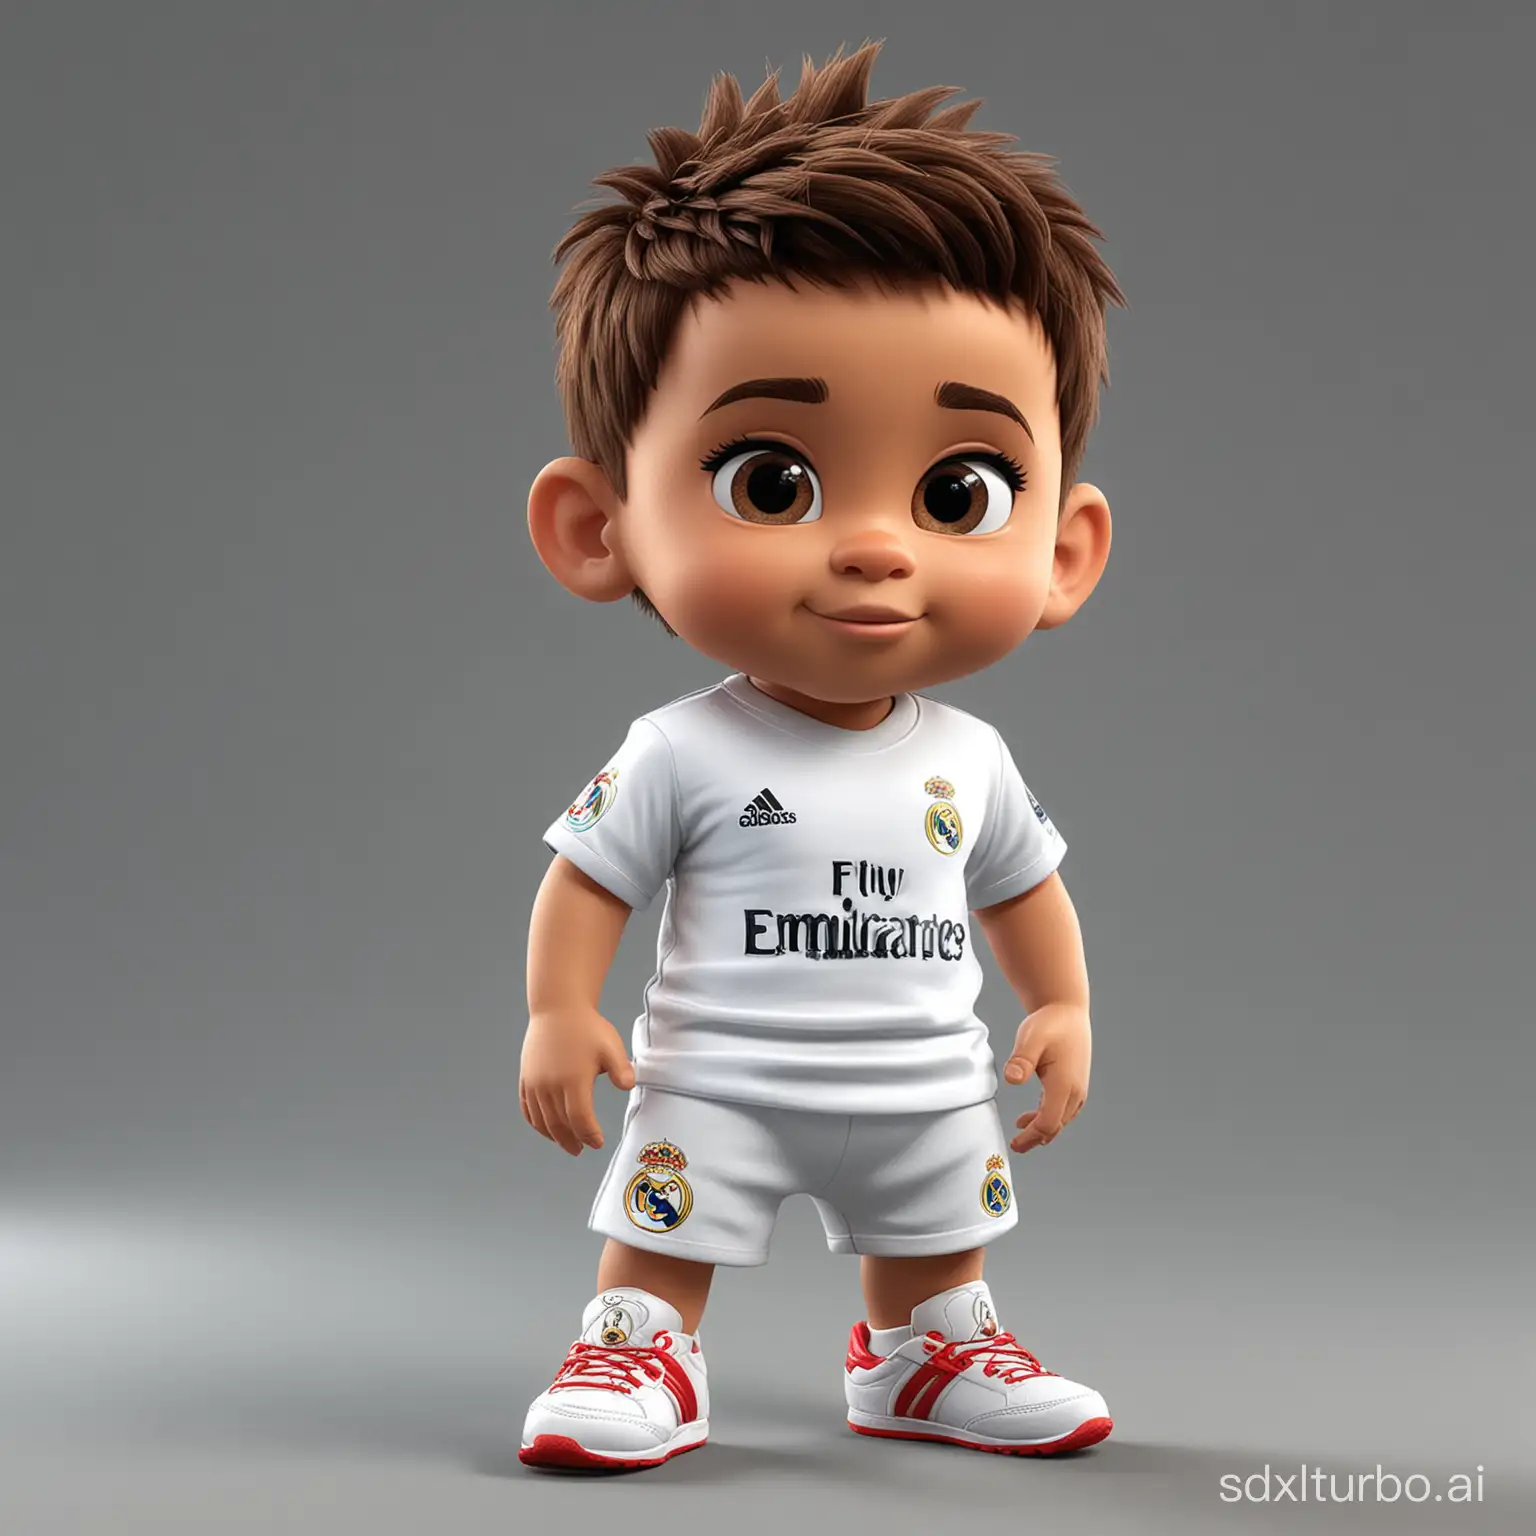 3D MASCOTTE Indonesian baby boy BODY SIMPLE FOR COMPLEMENT real madrid tshirt  and shoes